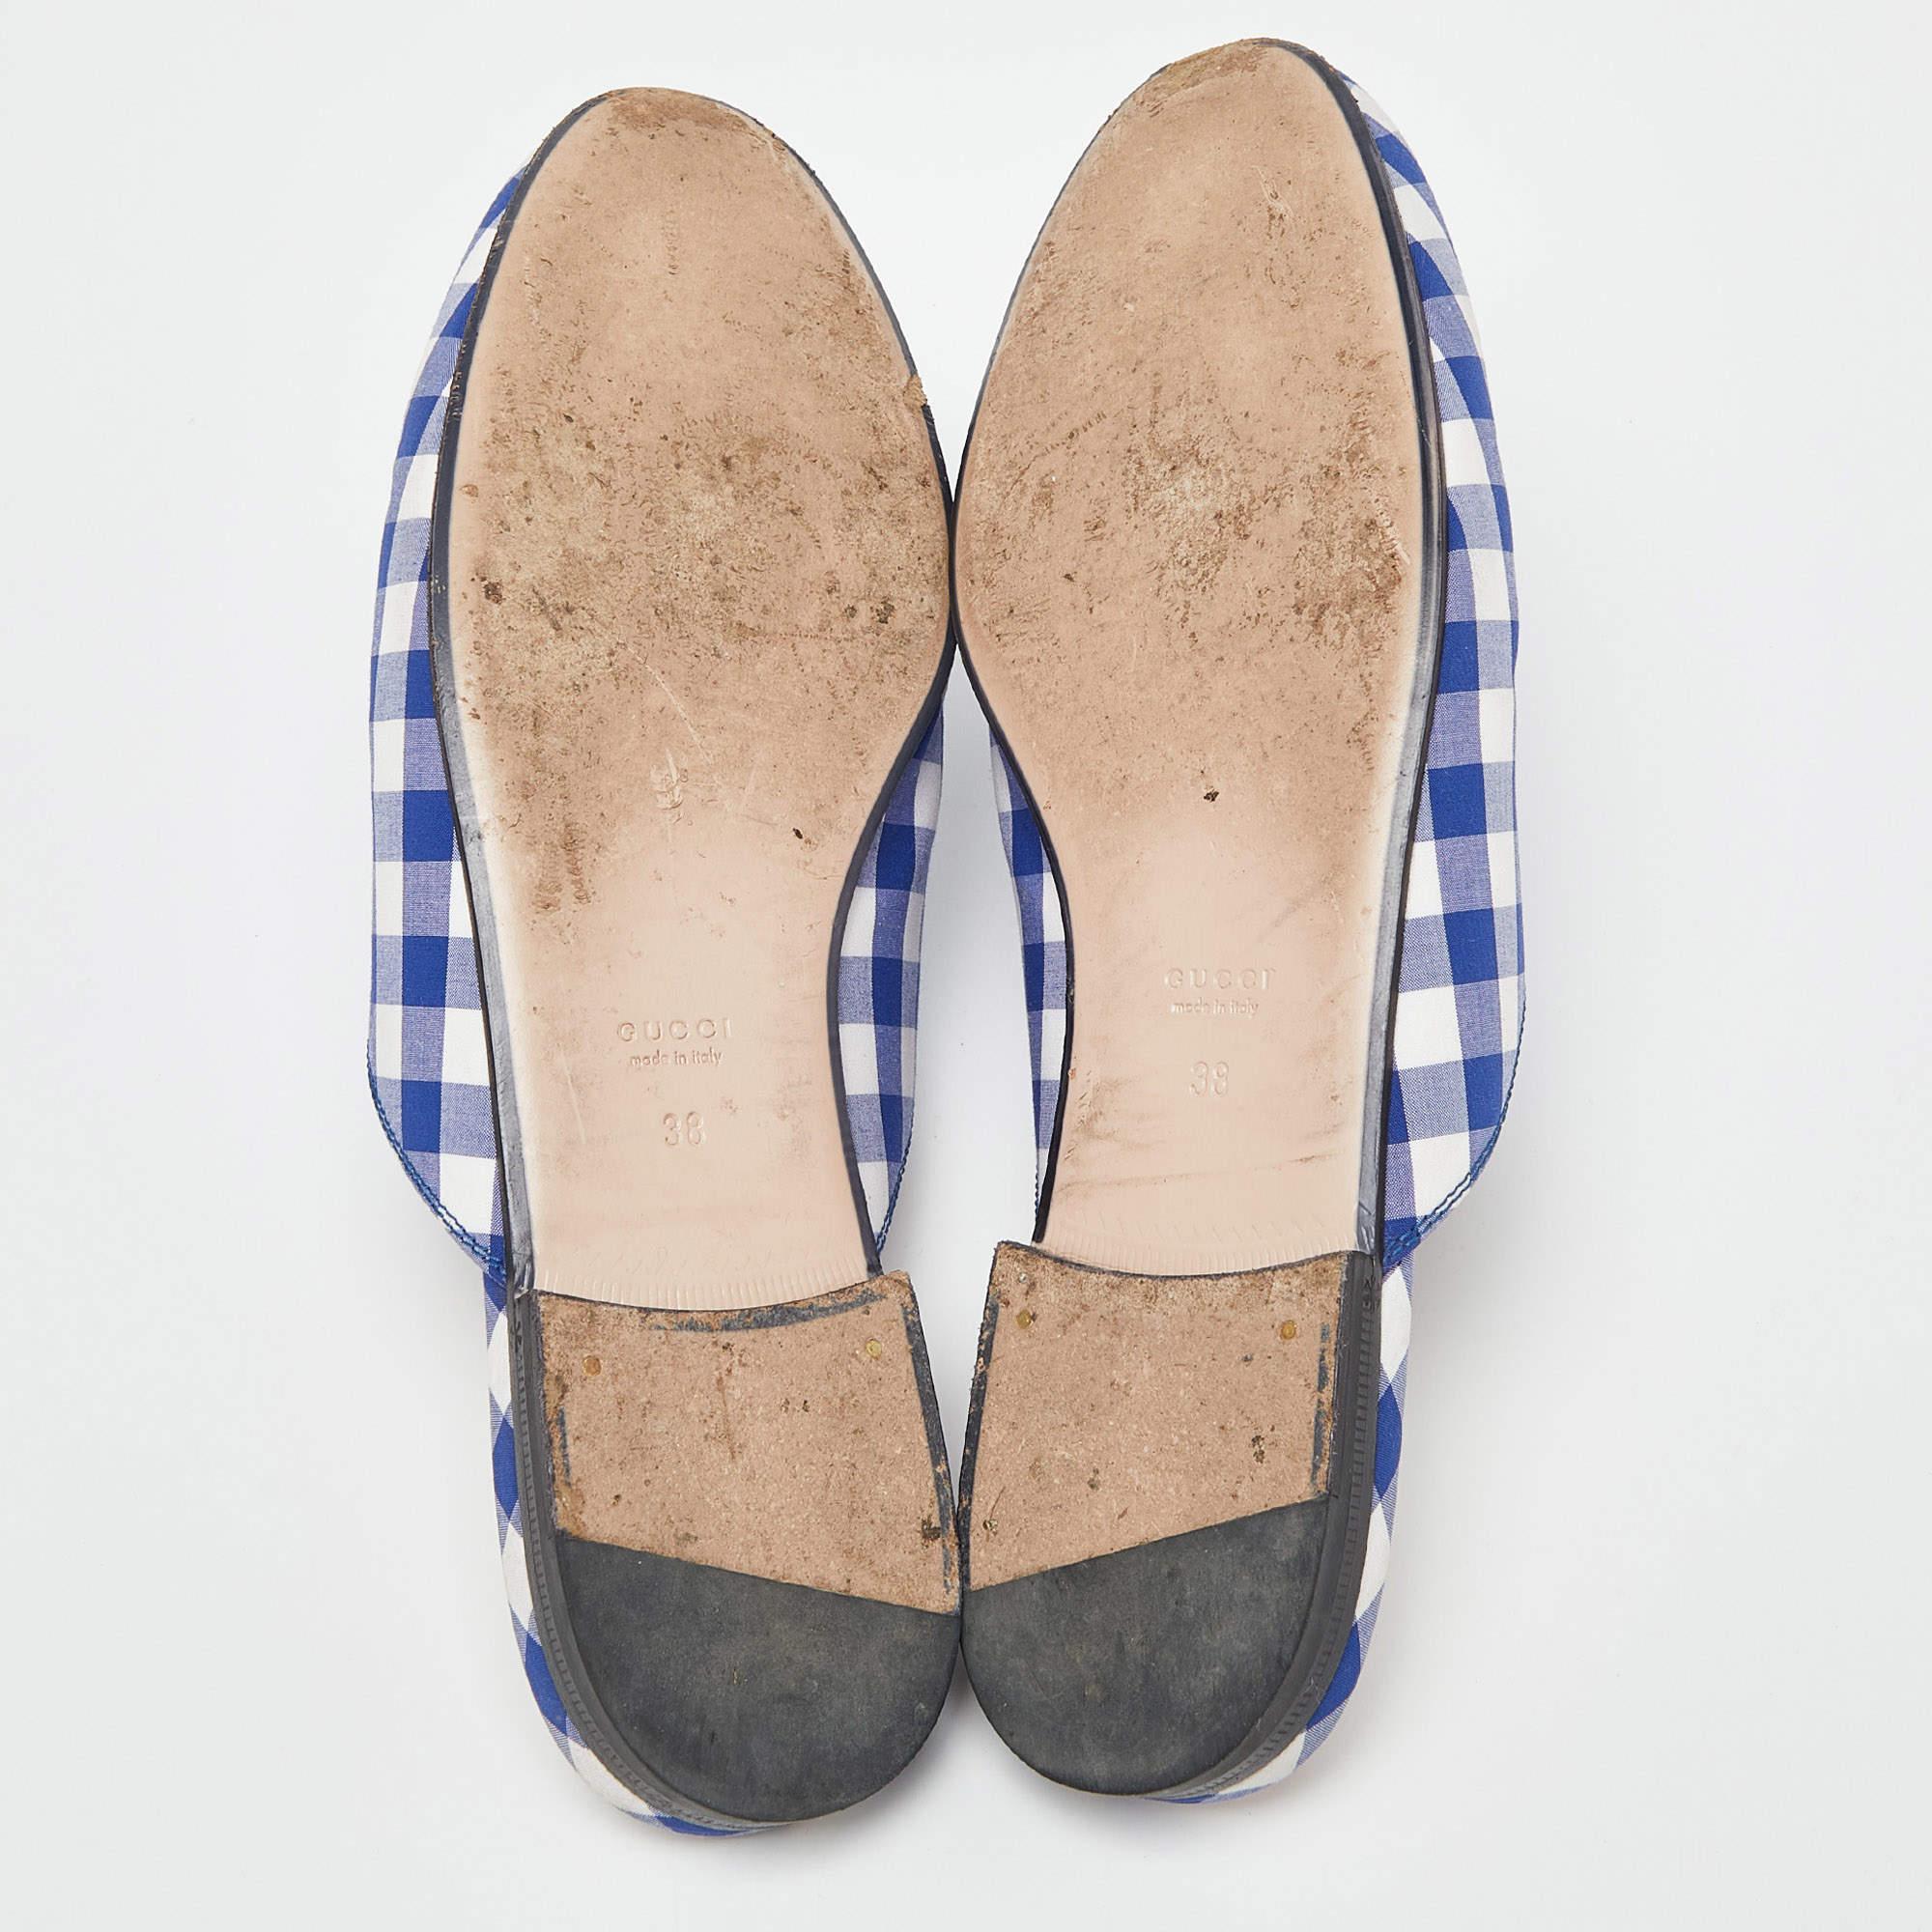 Gucci Blue/White Plaid Fabric Princetown Flat Mules Size 38 For Sale 4